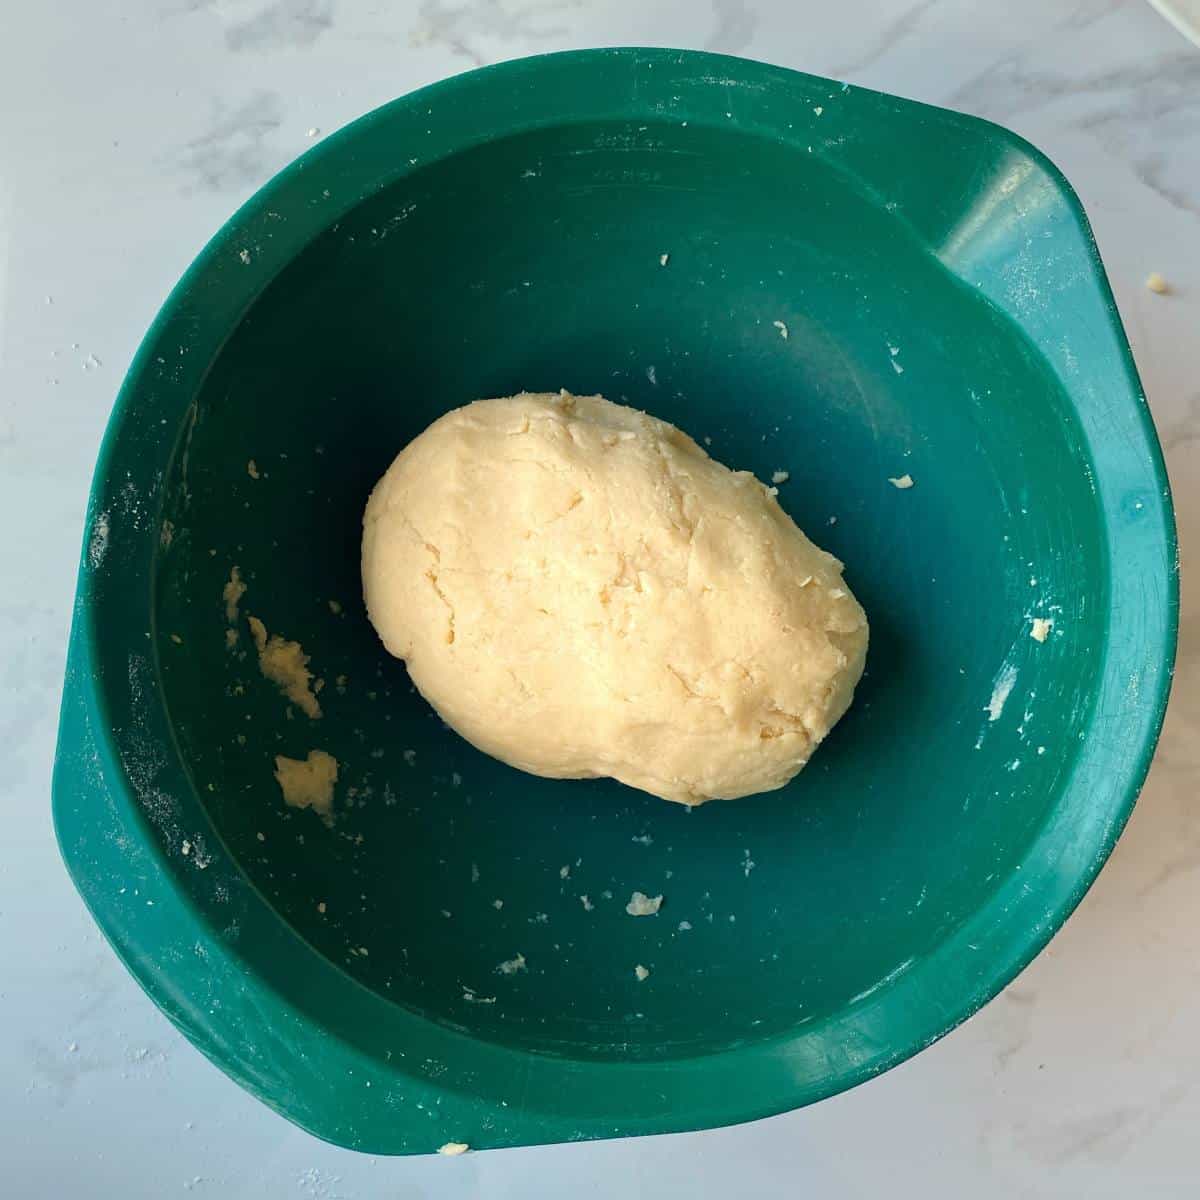 The mixture for short crust pastry in a green mixing bowl - mixed into a ball